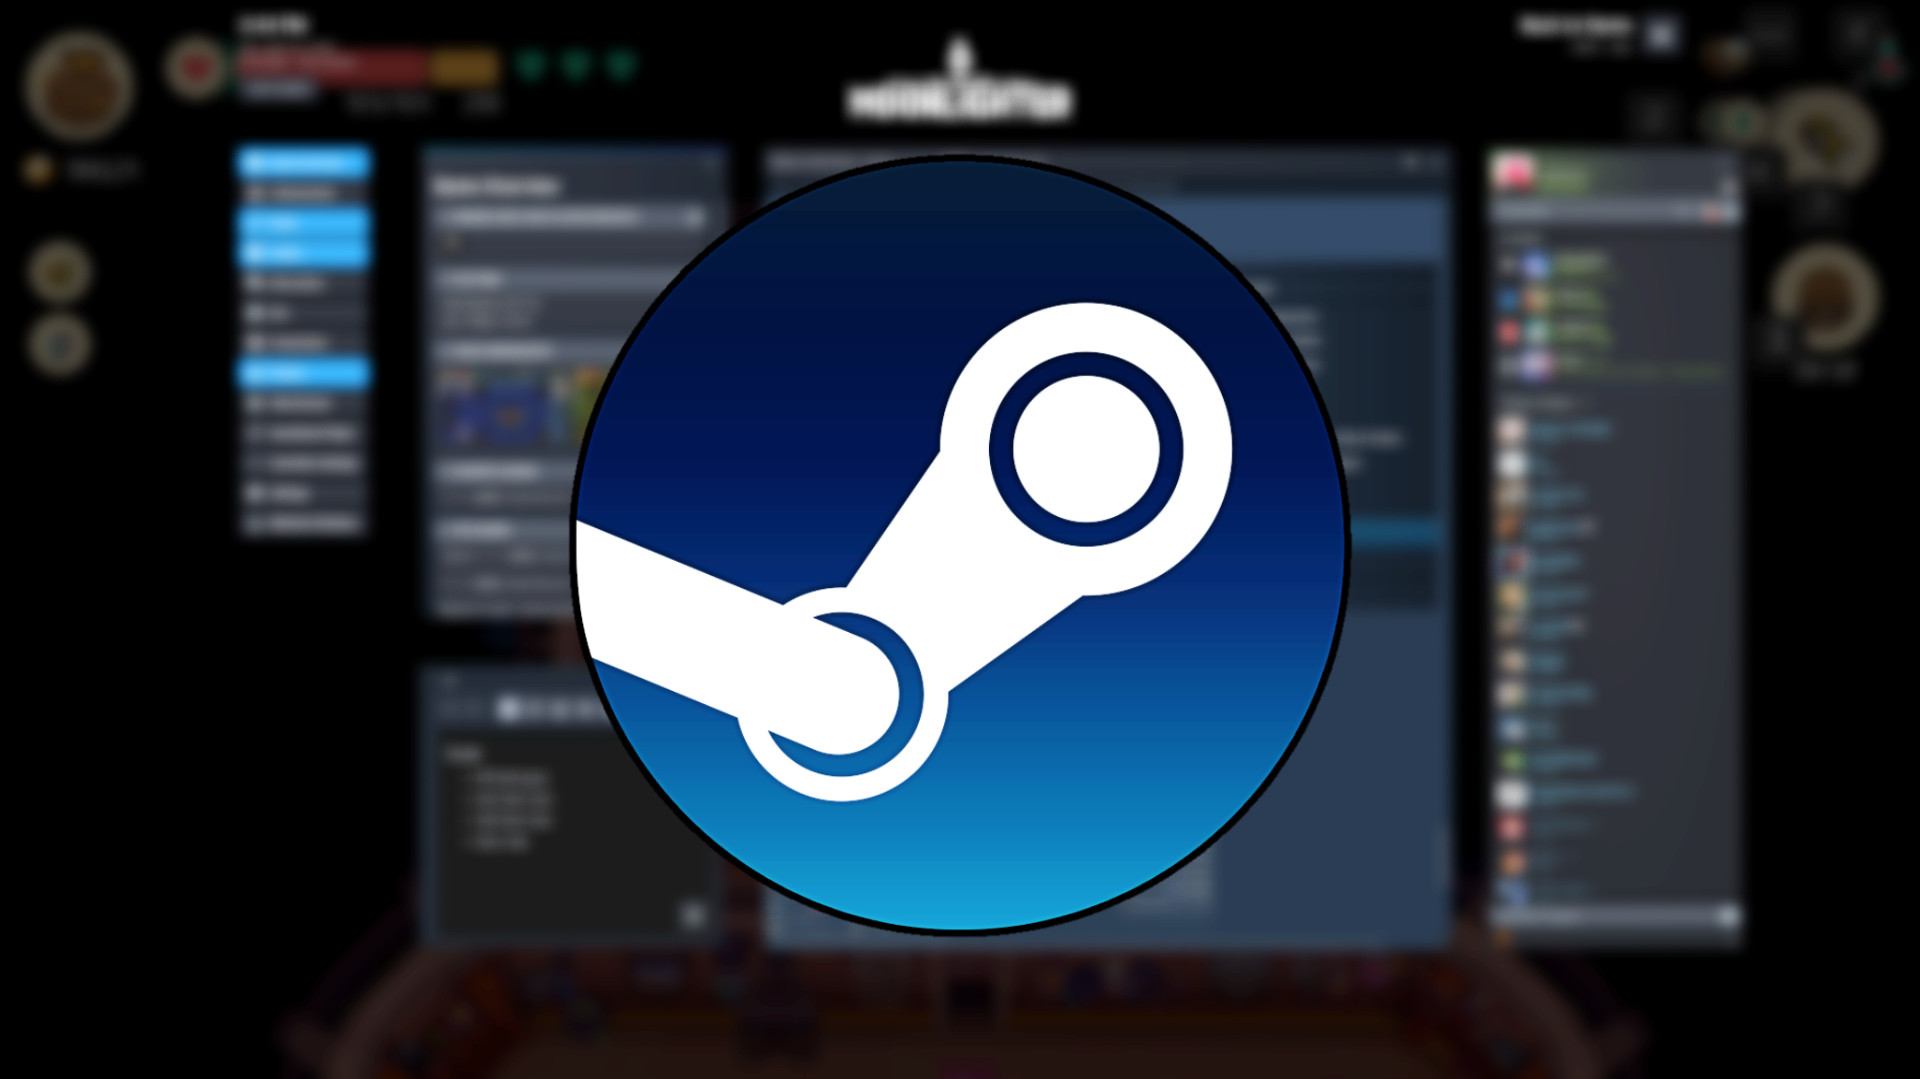 Steam’s in-game overlay just got a whole lot more useful